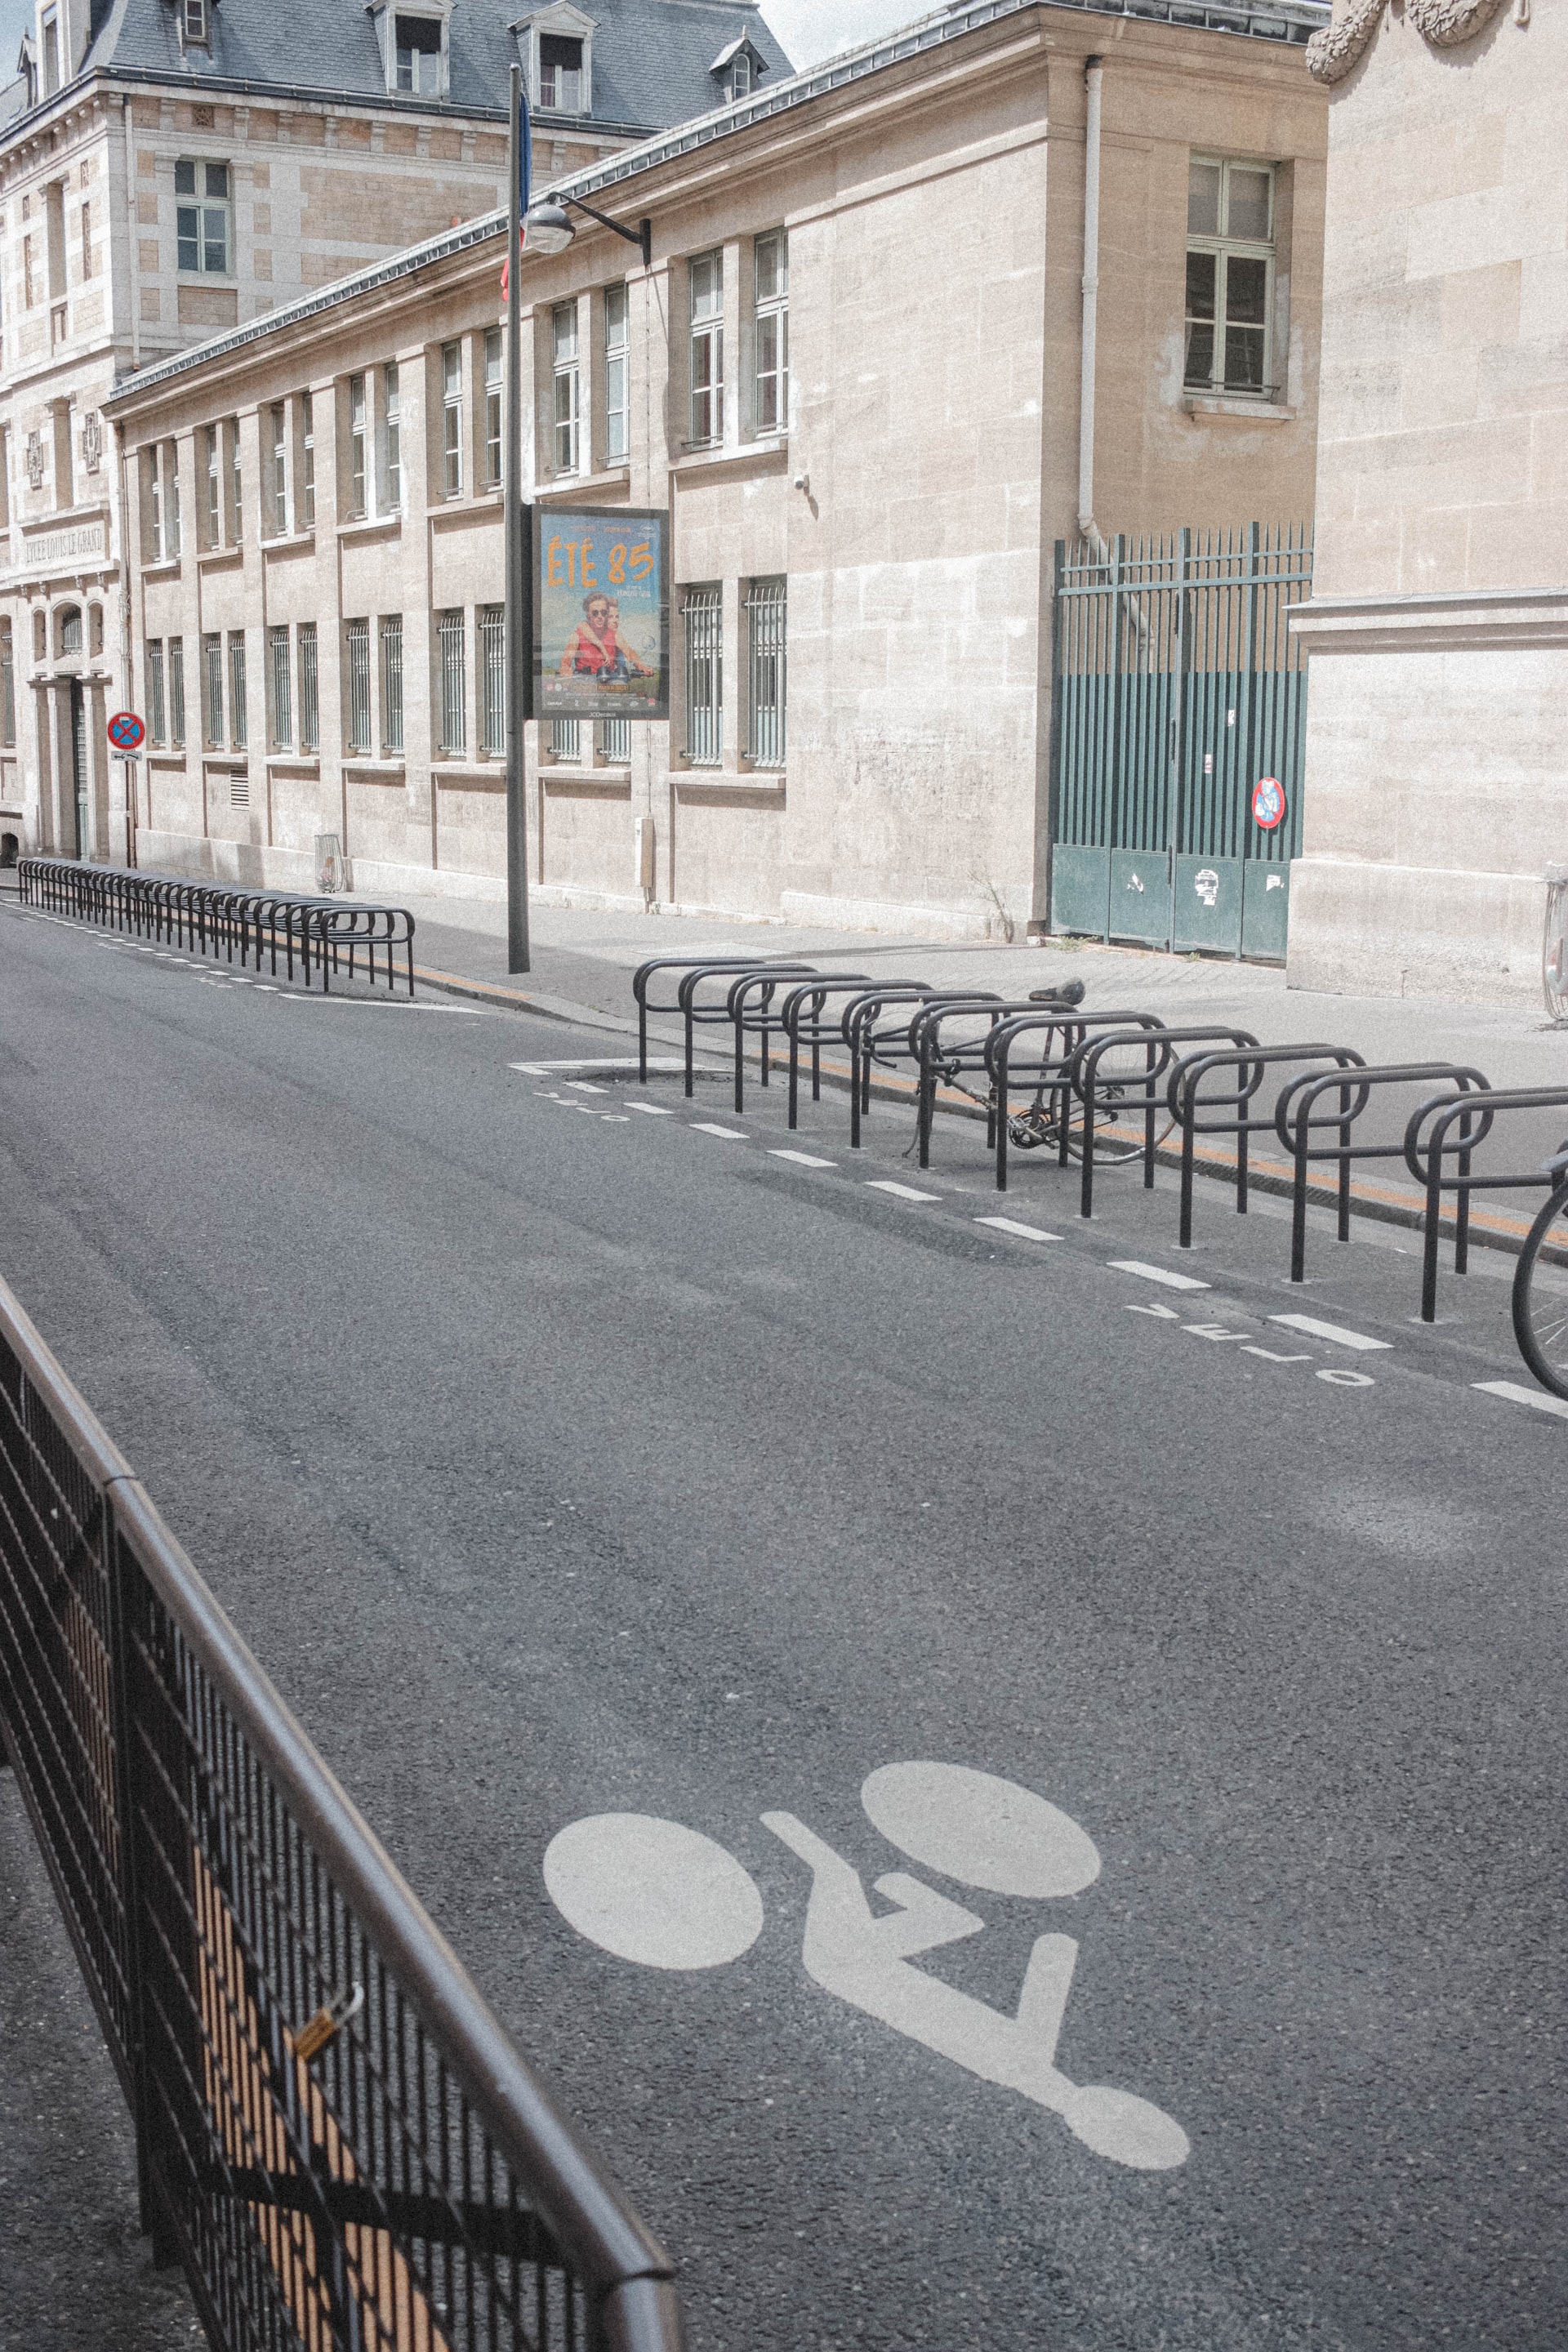 In Paris, 6,631 complaints of bicycle theft were identified in 2020, an increase of 7% compared to 2019. In fact 81% of people who do not want to use a bicycle cite fear of theft as the first reason for this cessation. The offer of parking, especially secure parking, is therefore one of the determining factors for using a bicycle as a means of transport.